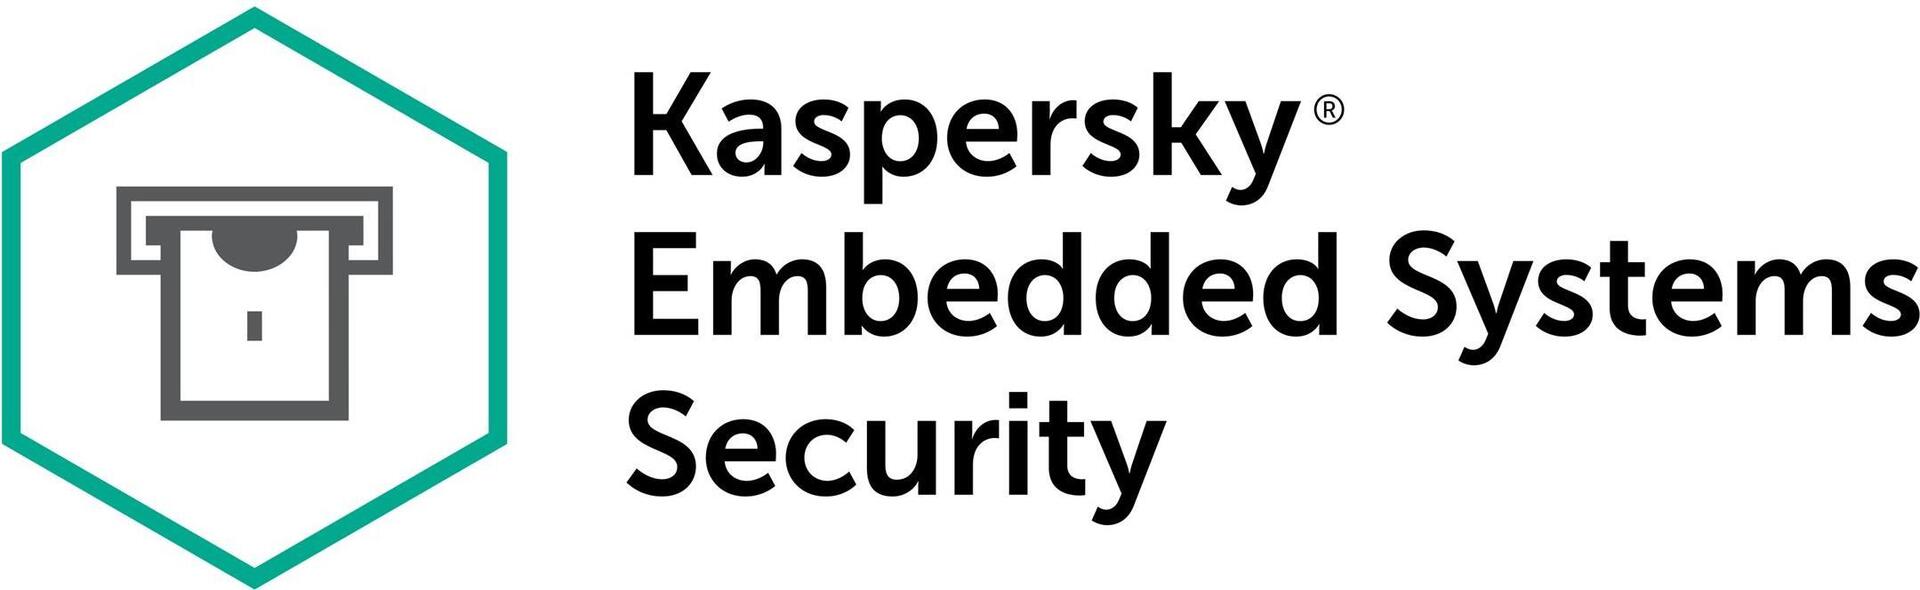 Kaspersky Embedded Systems Security (KL4891XATDS)